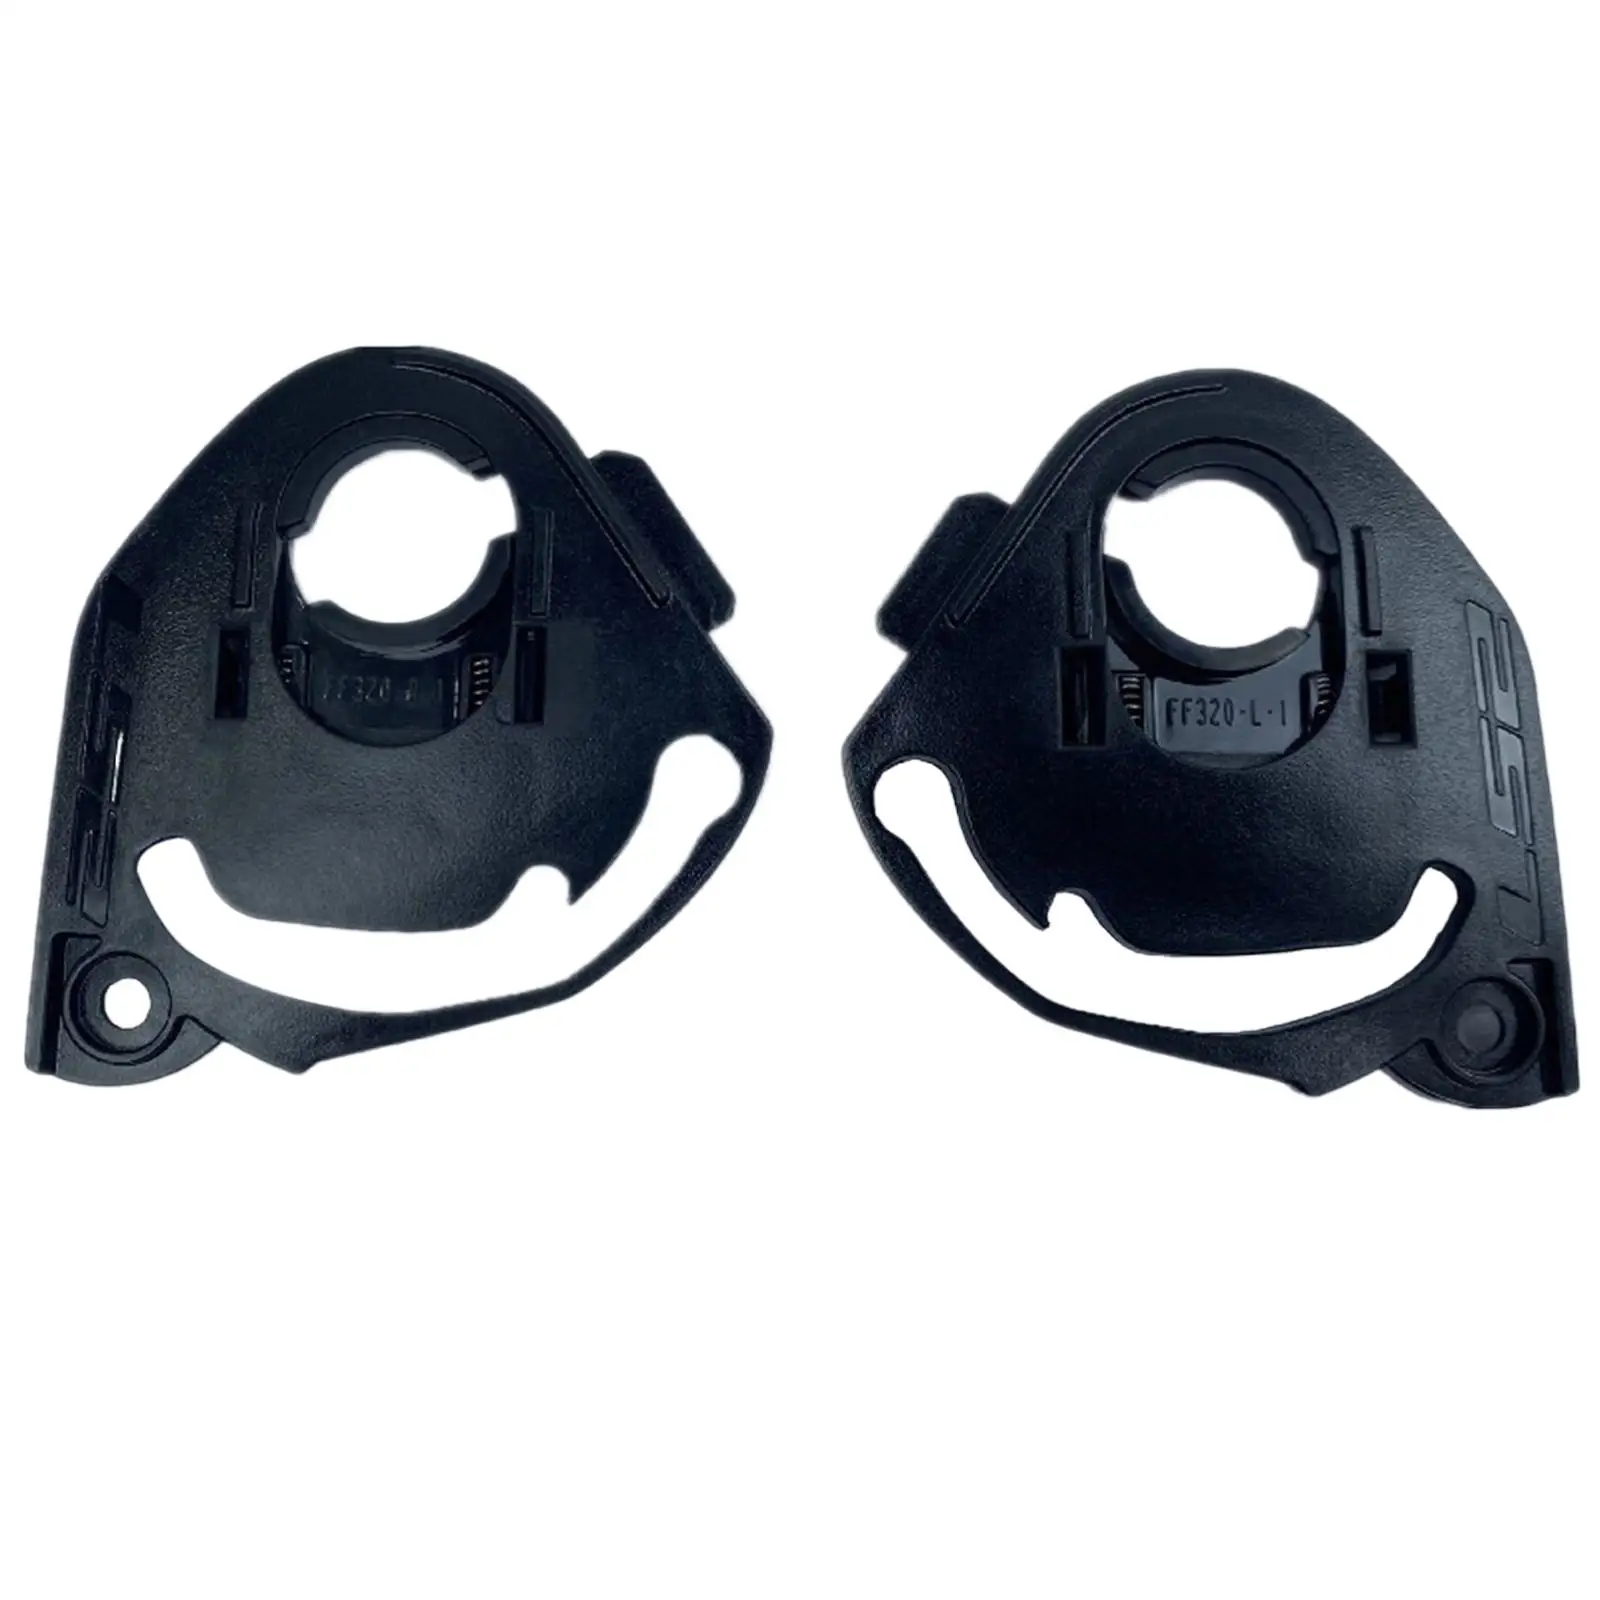 2 Pieces Motorcycles , Visor Mounts Fit for Ff320 Ff328 Ff353 800 320